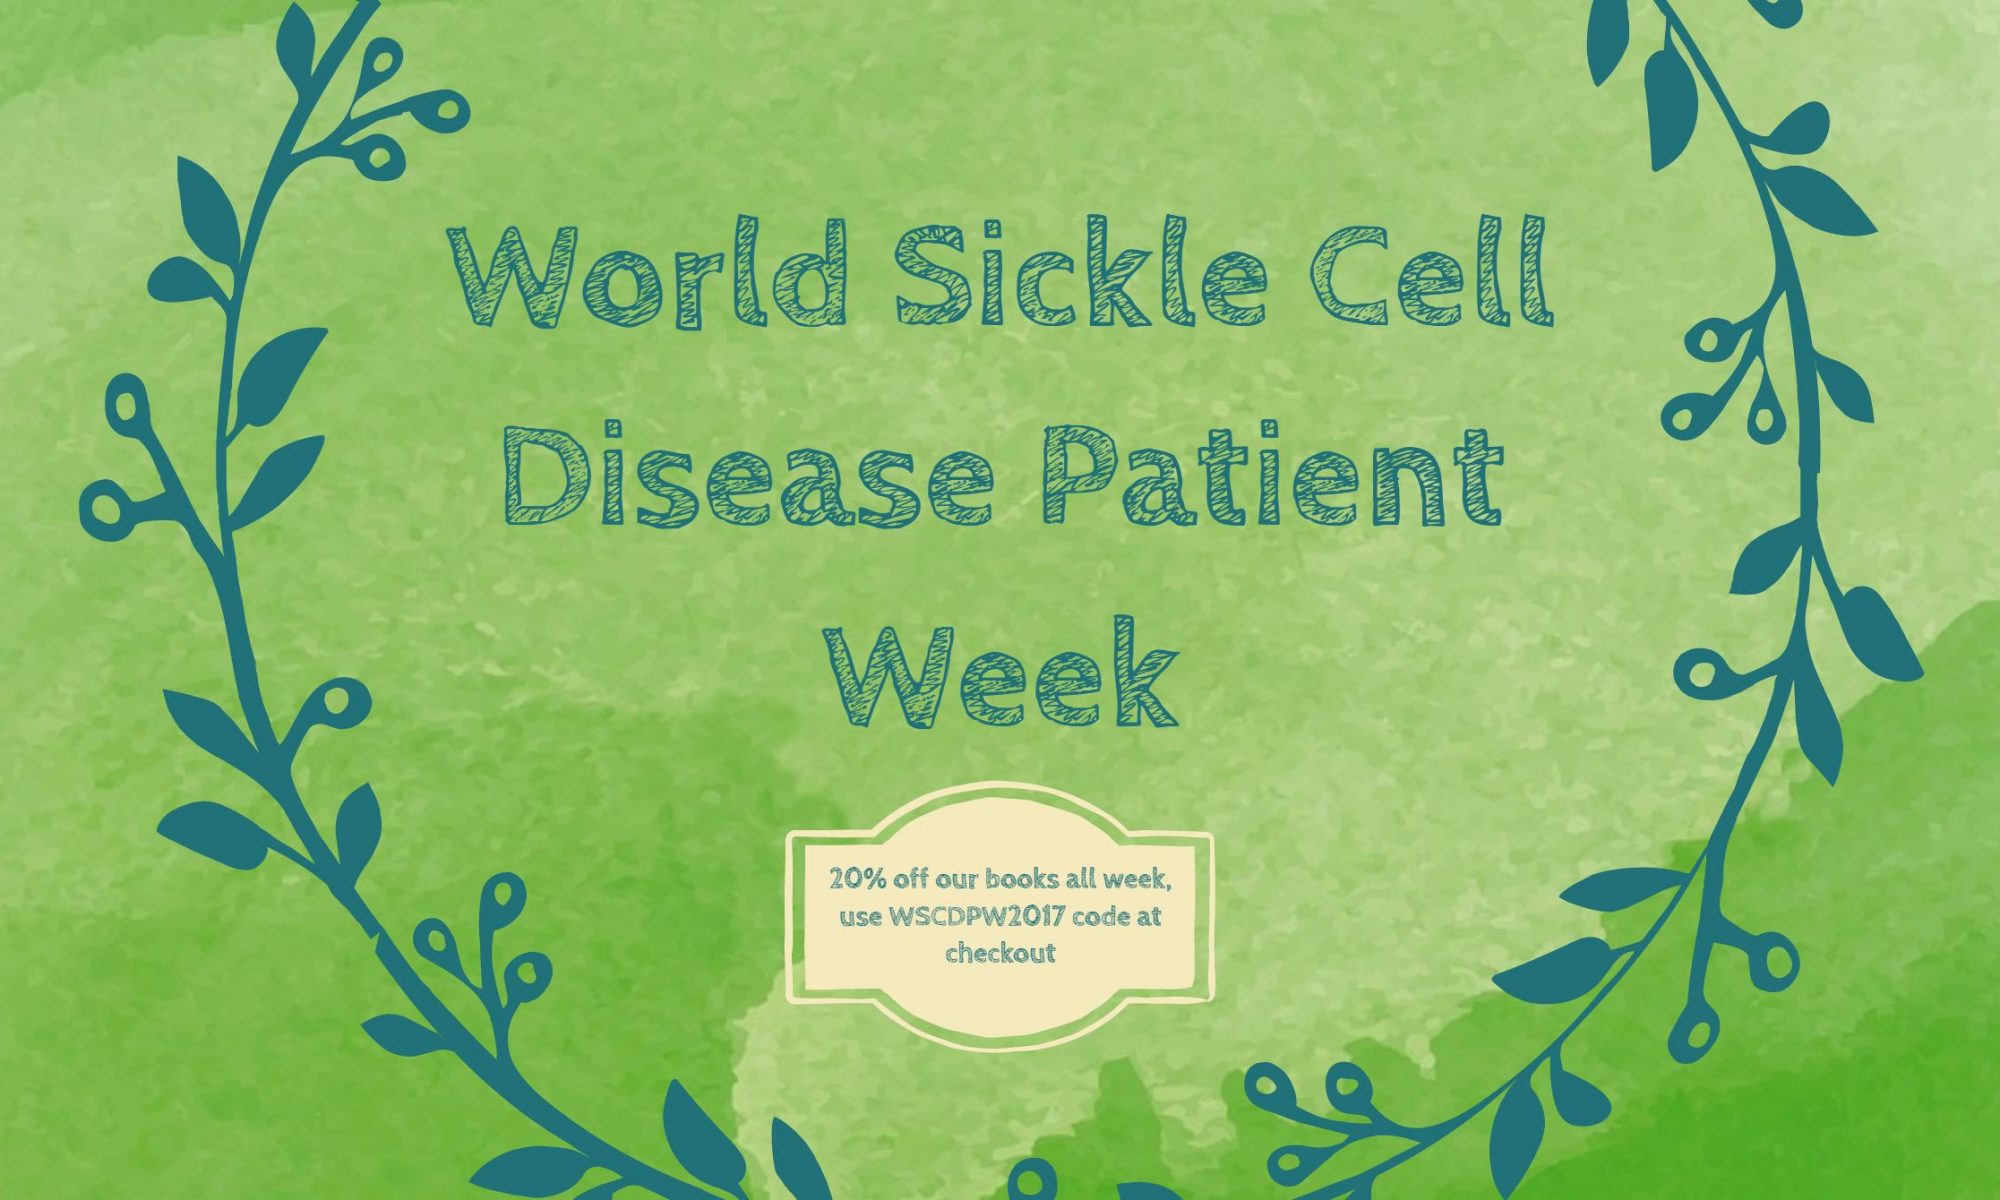 World Sickle Cell Patient week